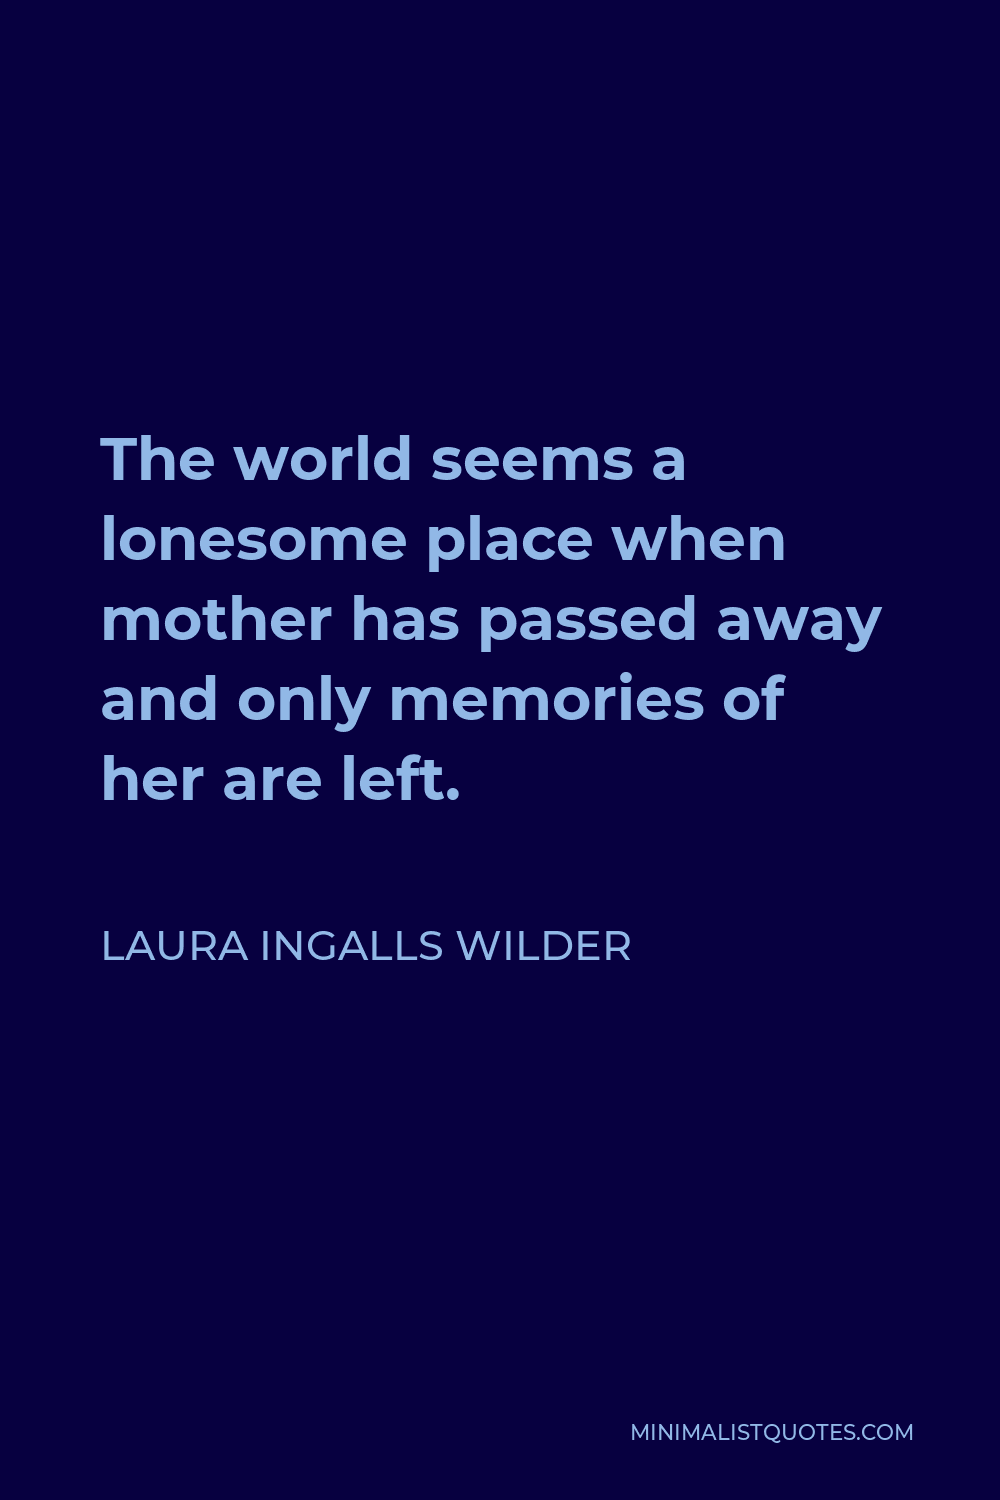 Laura Ingalls Wilder Quote - The world seems a lonesome place when mother has passed away and only memories of her are left.